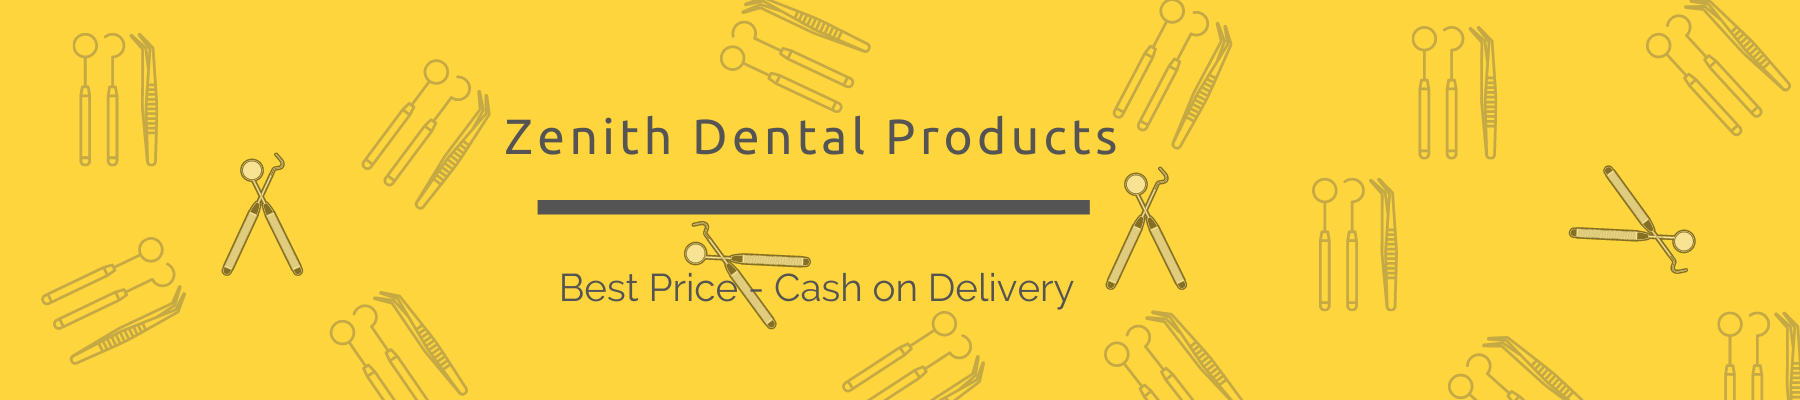 zenith-dental-products